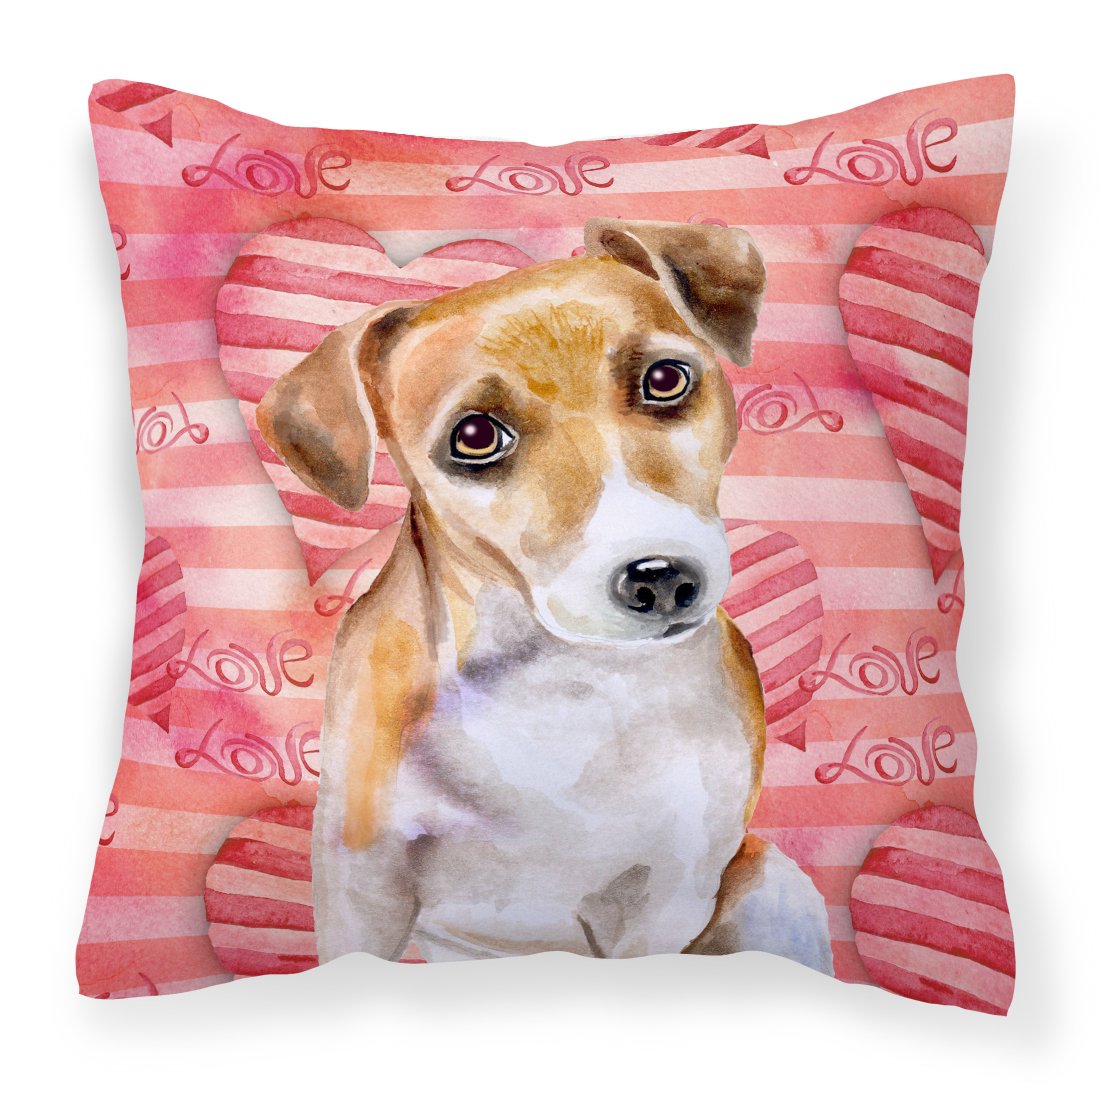 Jack Russell Terrier #2 Love Fabric Decorative Pillow BB9800PW1818 by Caroline's Treasures